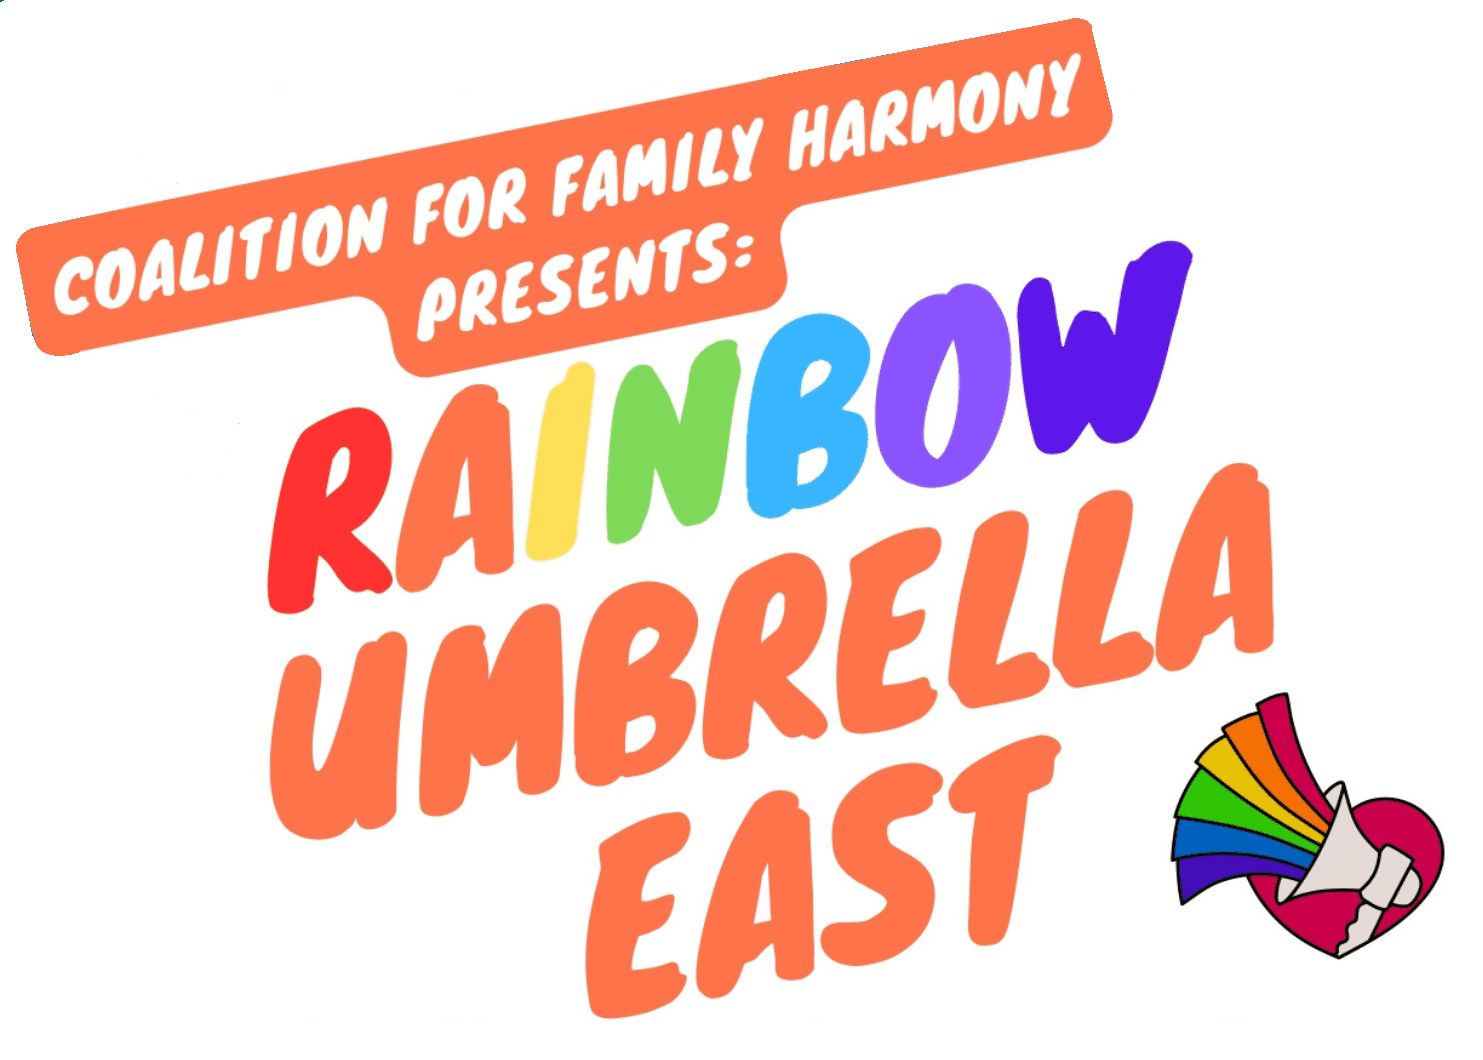 Colorful event logo for "coalition for family harmony: presents rainbow umbrella east" with a stylized umbrella graphic.